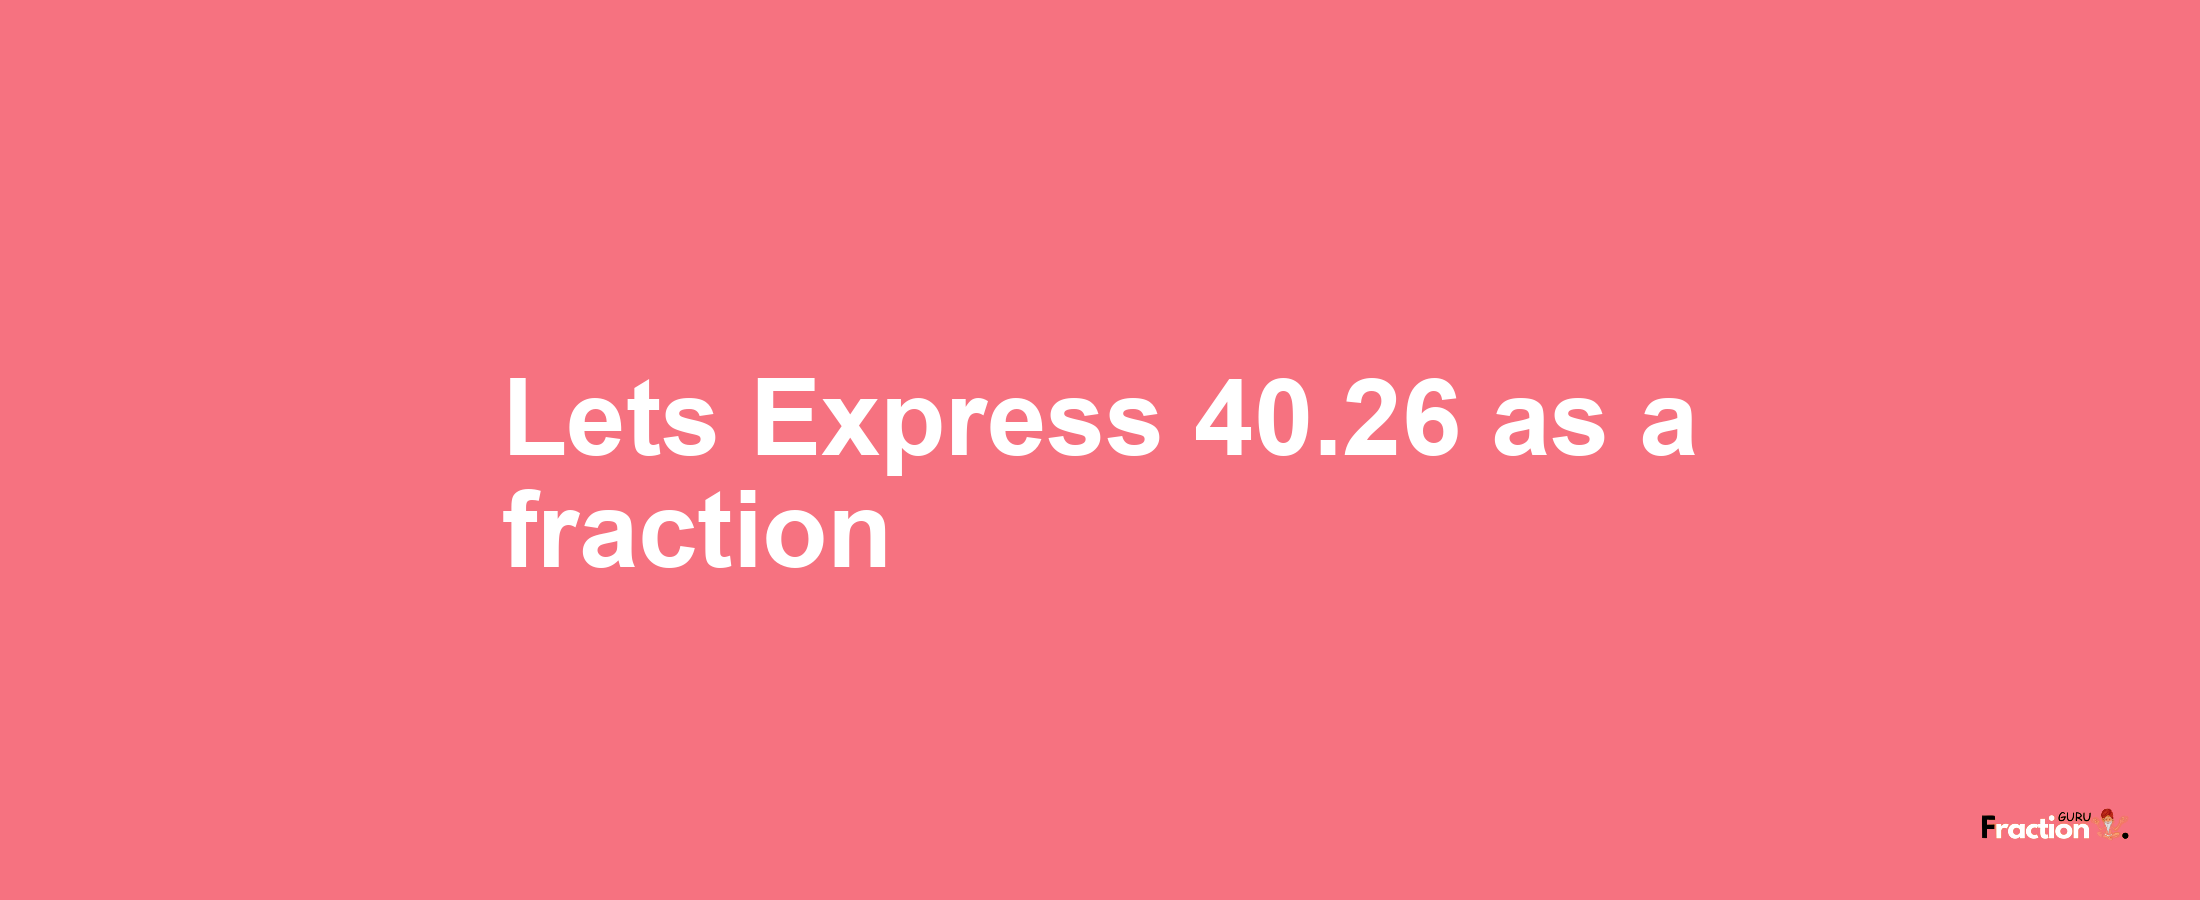 Lets Express 40.26 as afraction